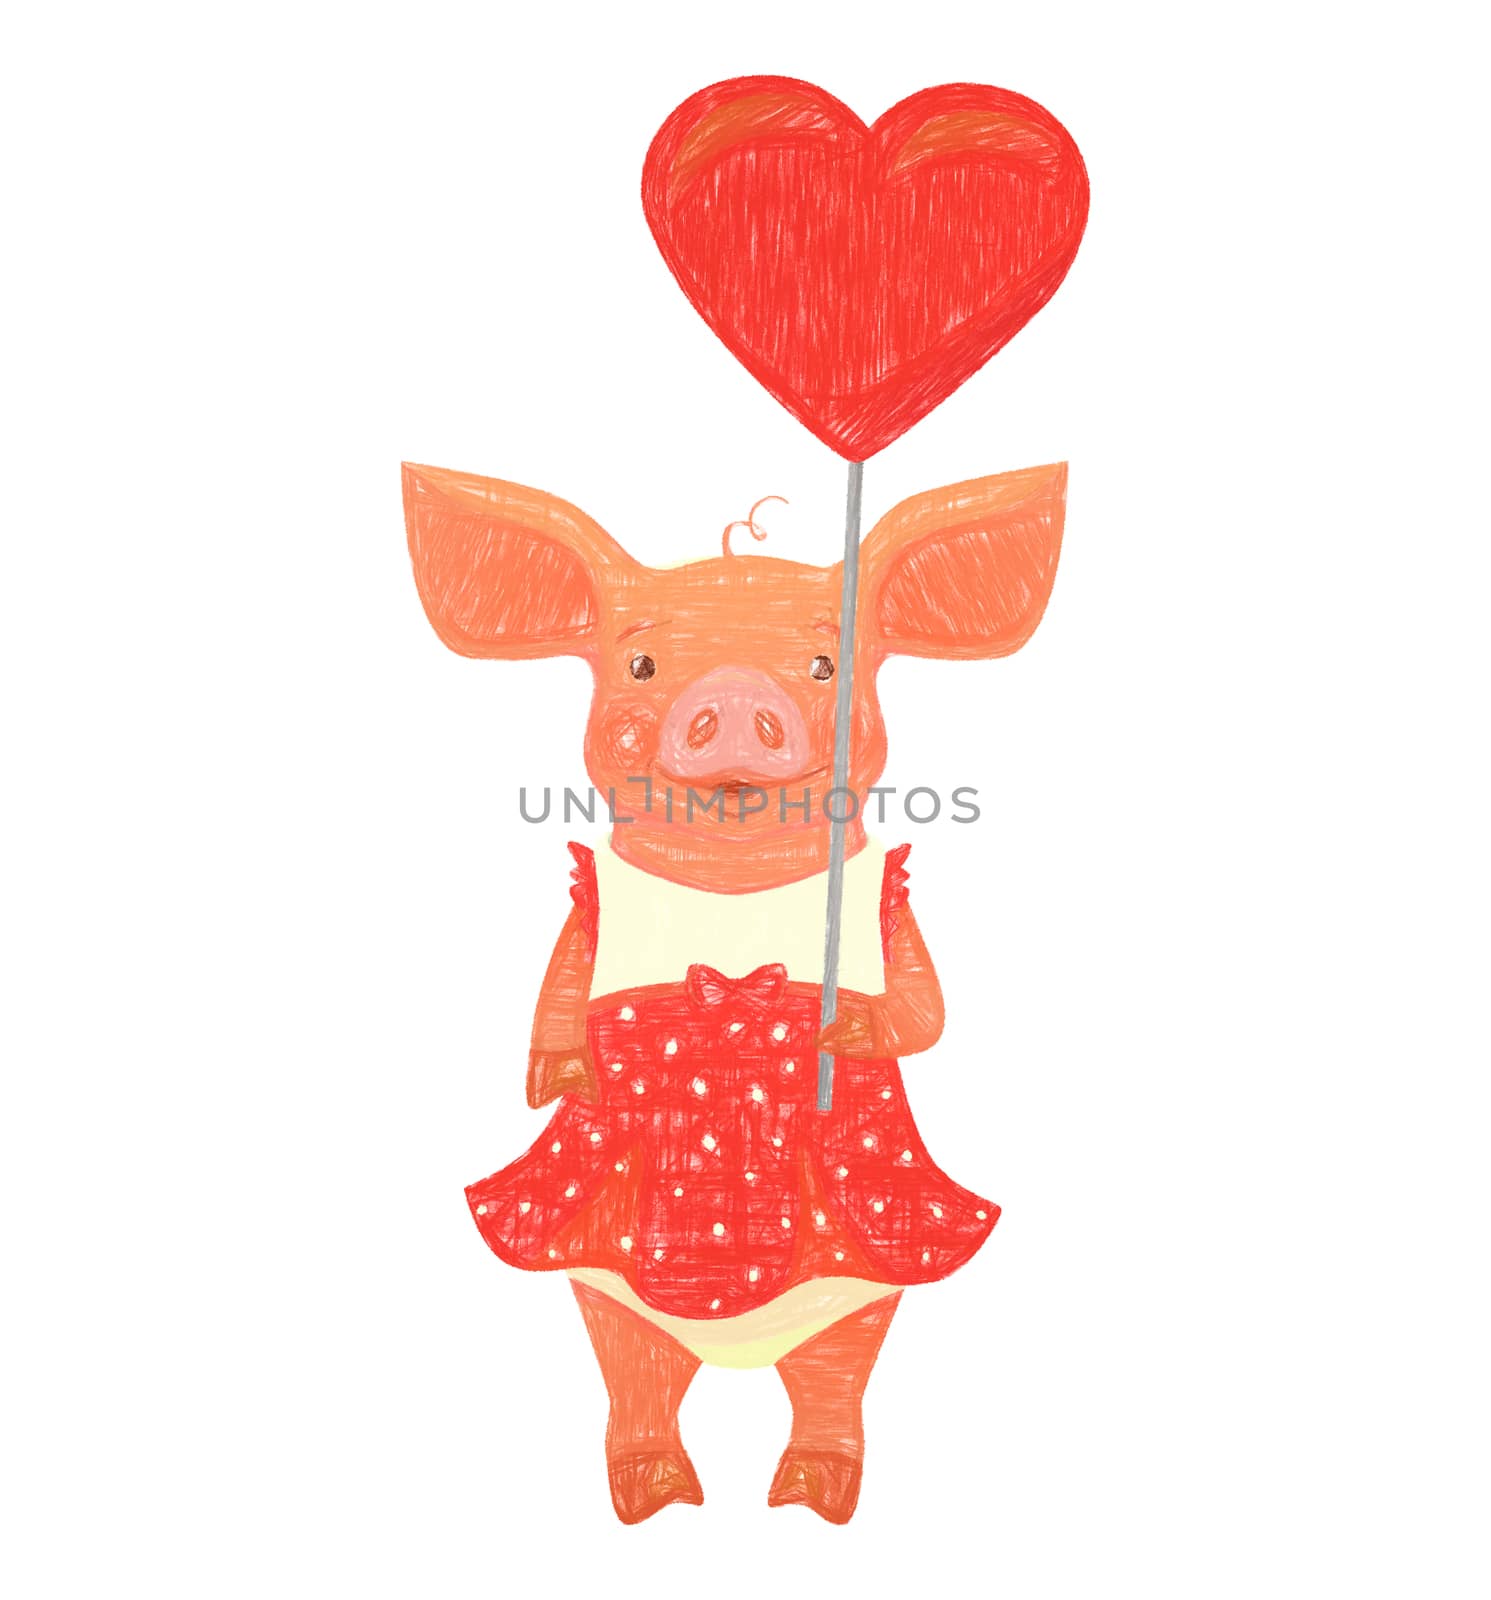 Cute pig holding heart . Cute animal. Heart sign illustration. Pig in overalls